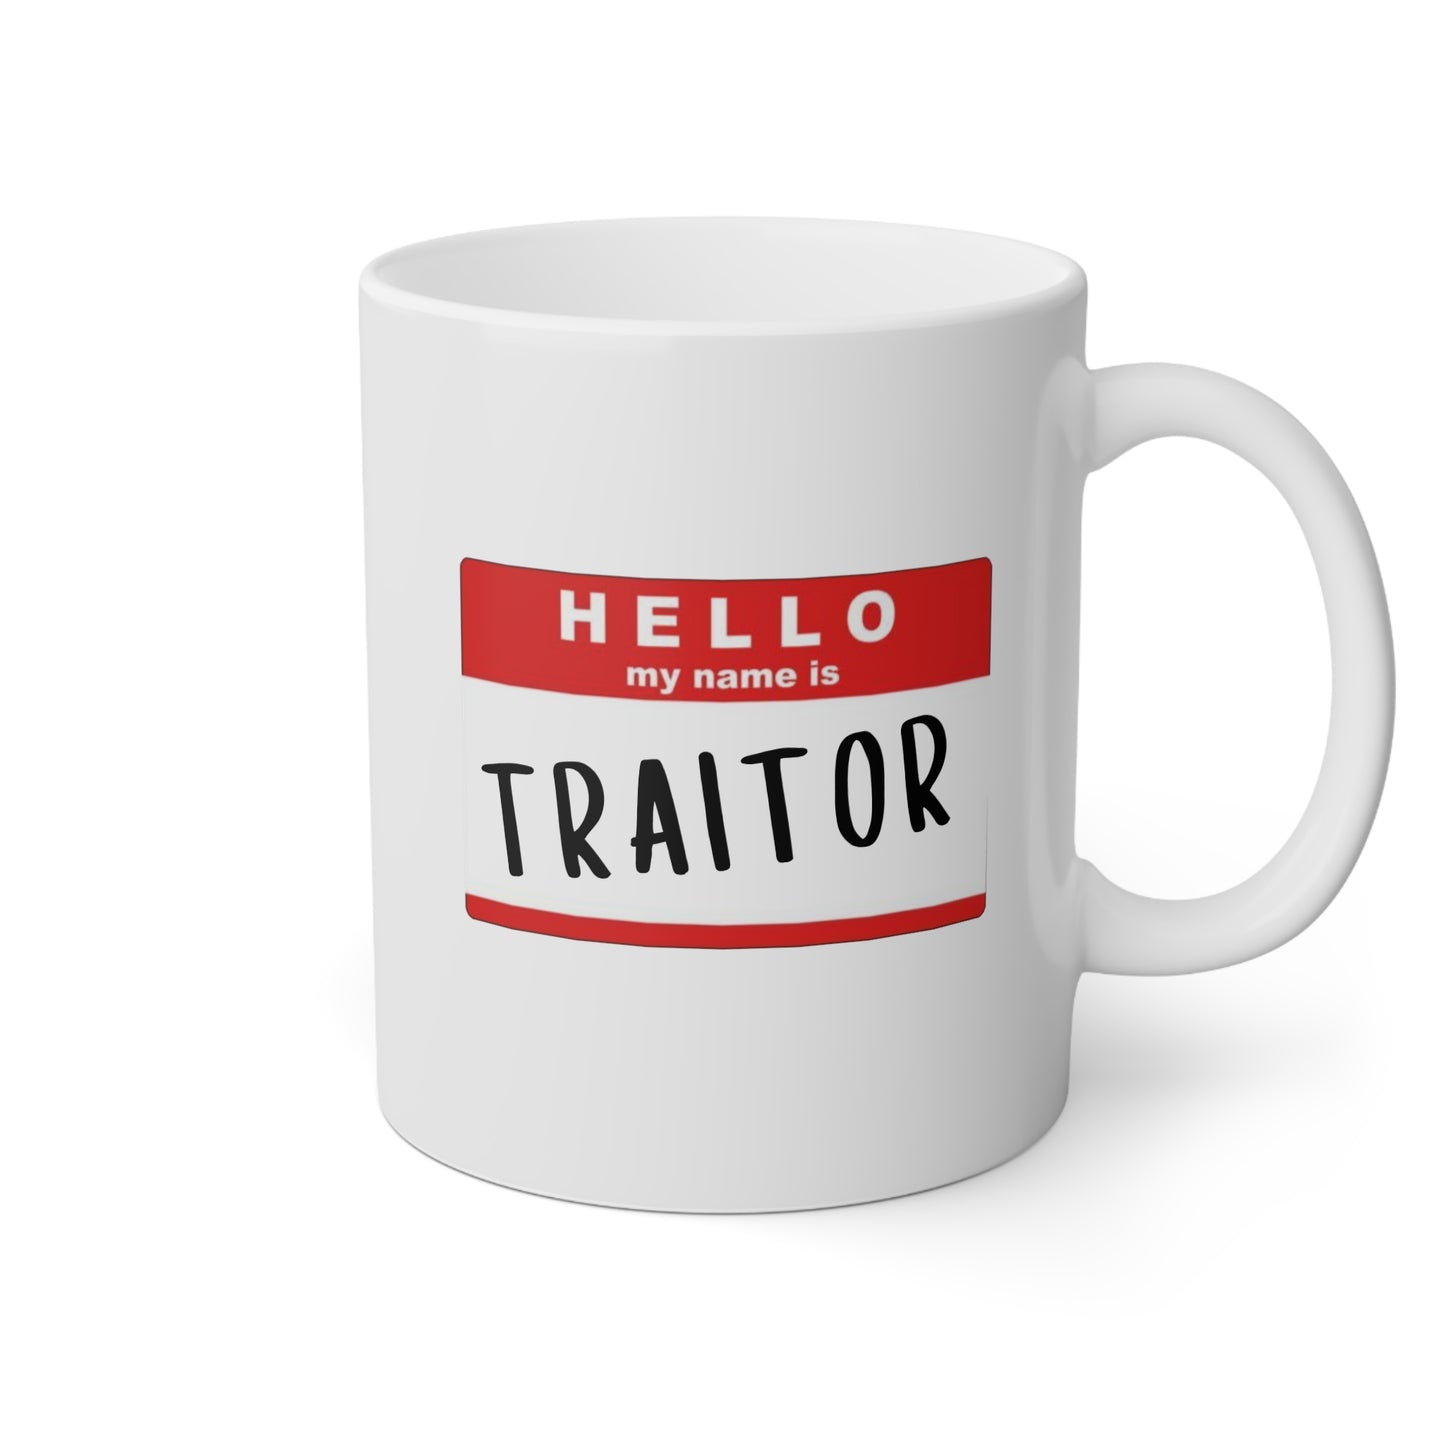 Hello My Name Is Traitor 11oz white funny large coffee mug gift for coworker colleague work promotion leaving goodbye new job congrats waveywares wavey wares wavywares wavy wares